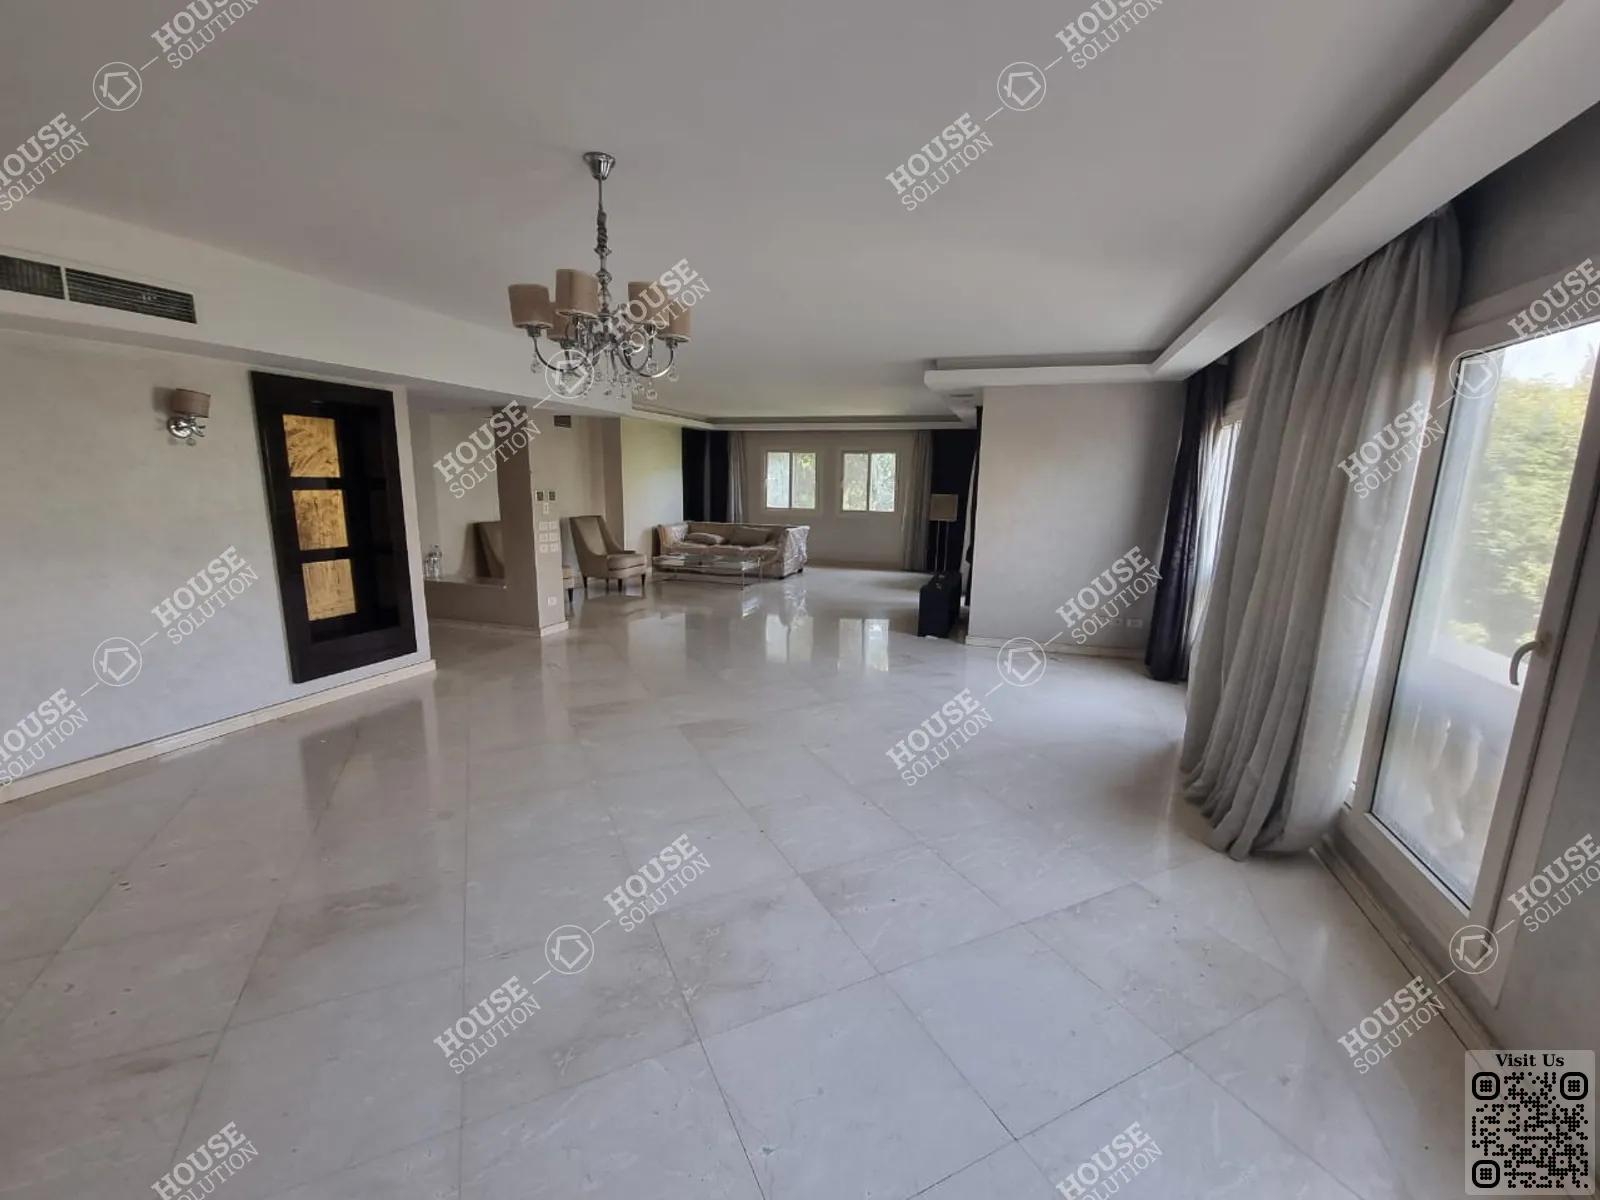 RECEPTION  @ Apartments For Rent In Maadi Maadi Sarayat Area: 300 m² consists of 4 Bedrooms 4 Bathrooms Modern furnished 5 stars #5536-2